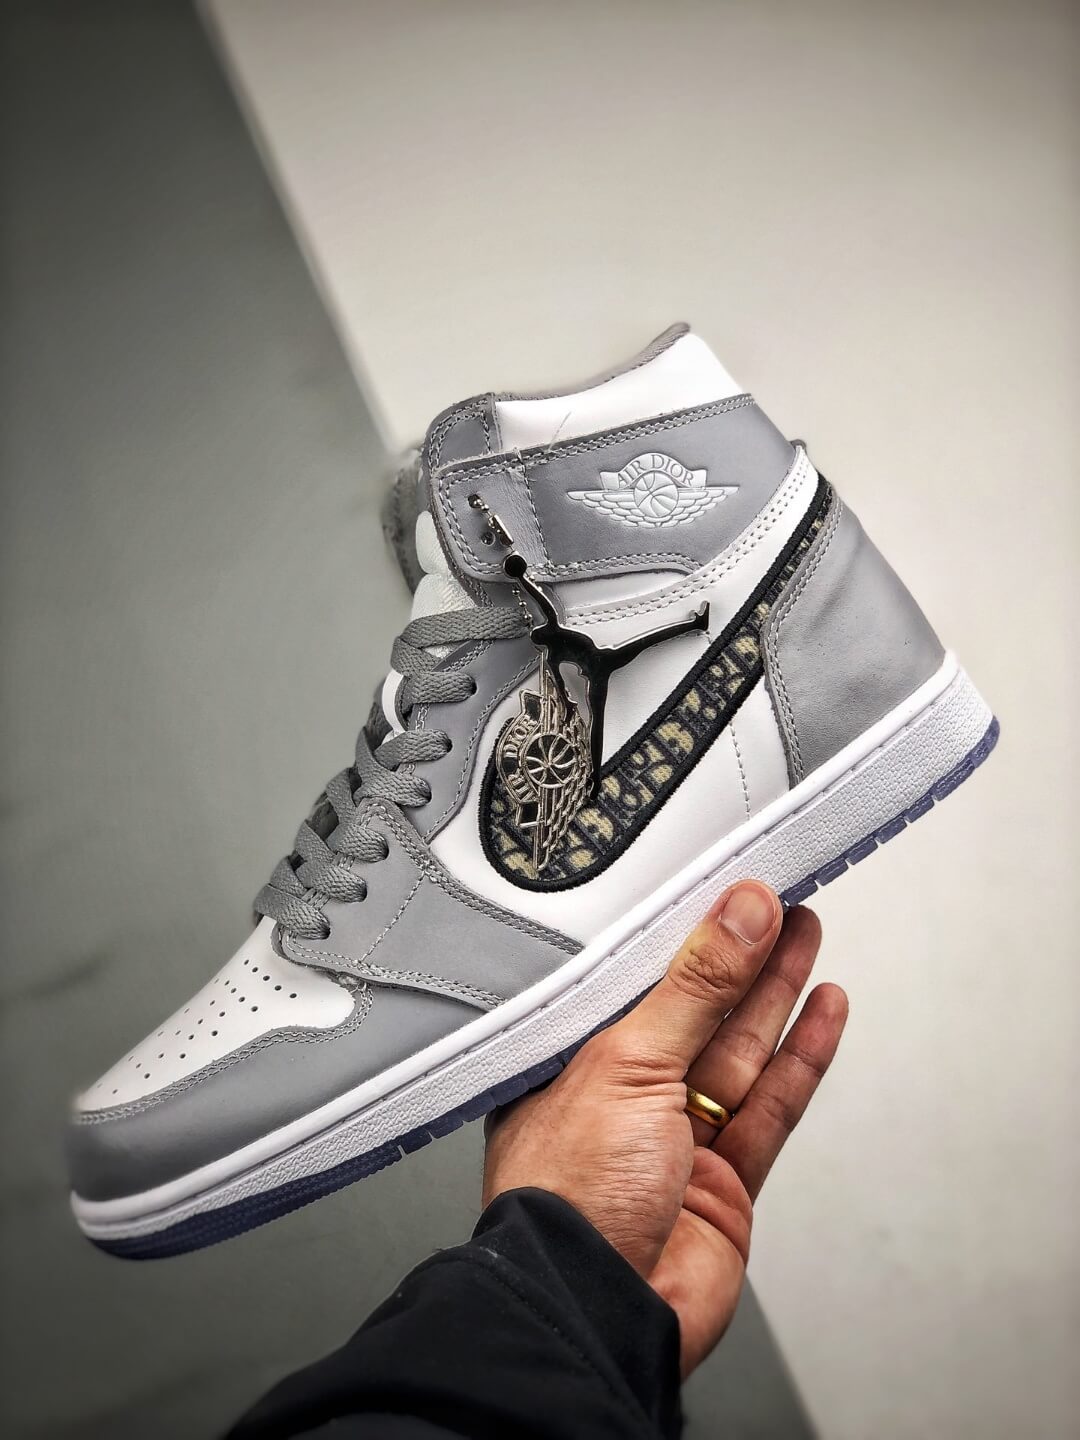 The Dior x Air Jordan 1 High Sneaker White and Grey Upper Top RepShoes 04